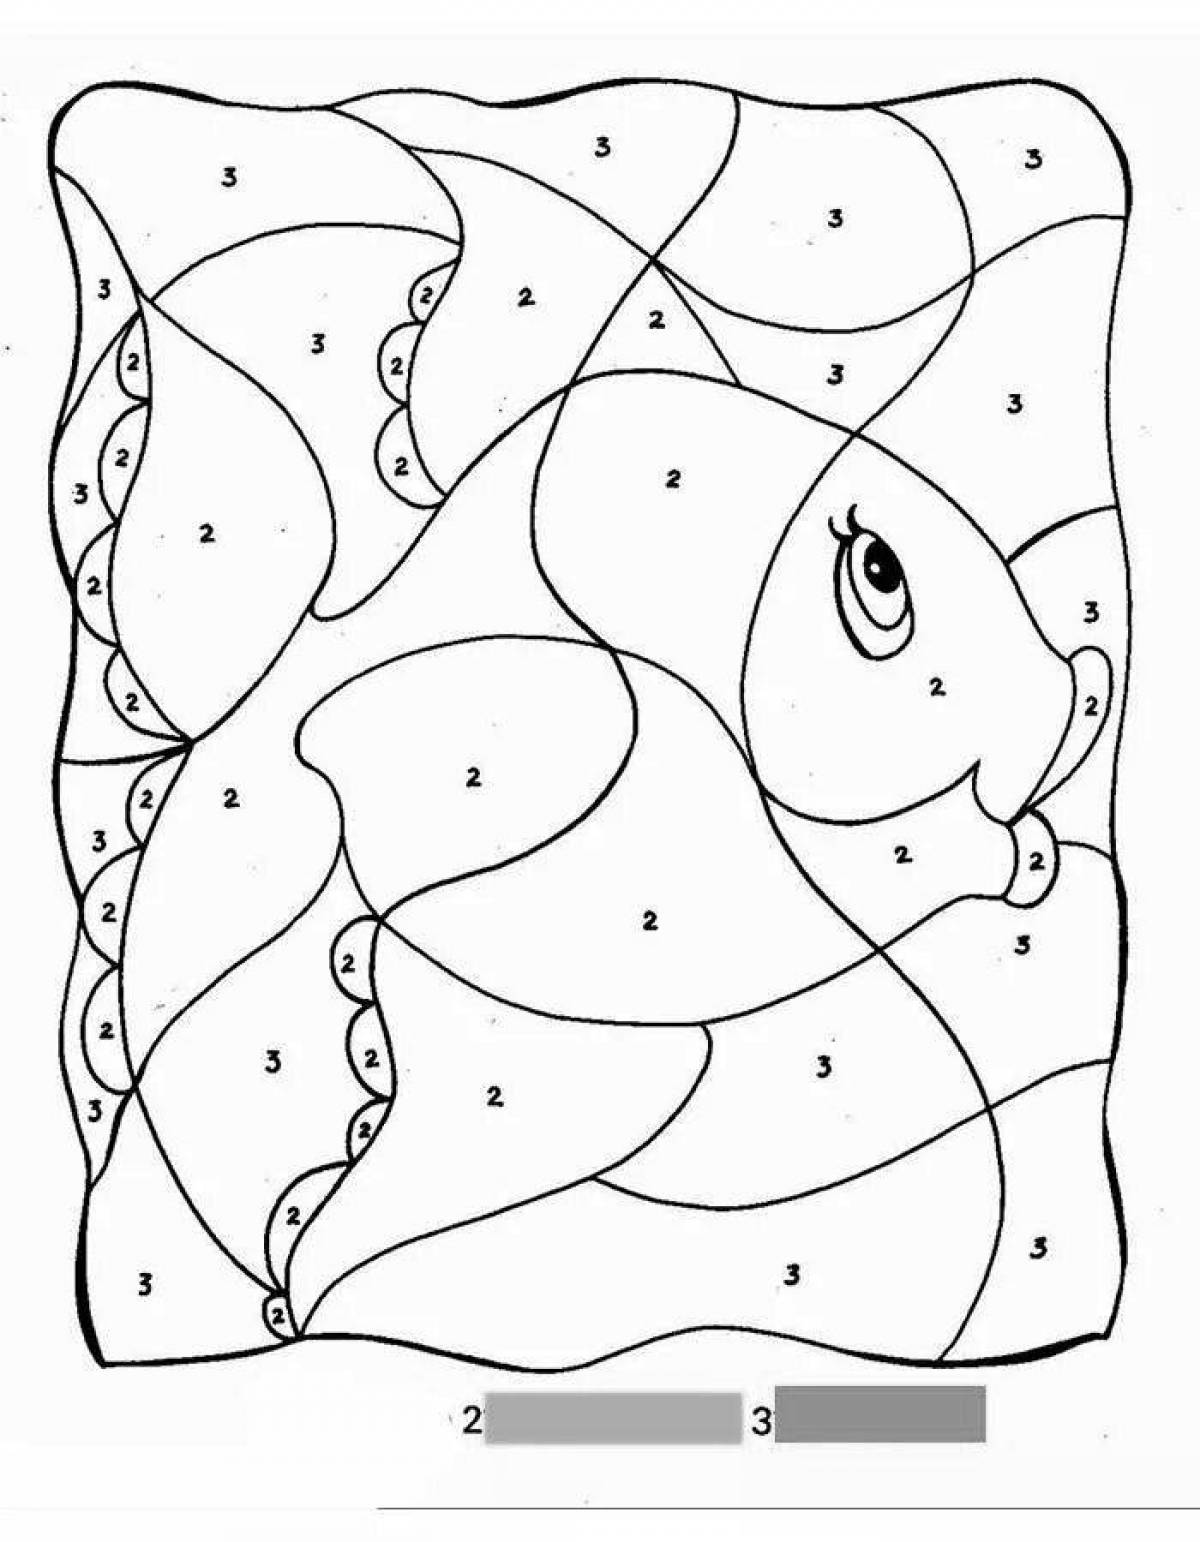 Joyful children's coloring by numbers